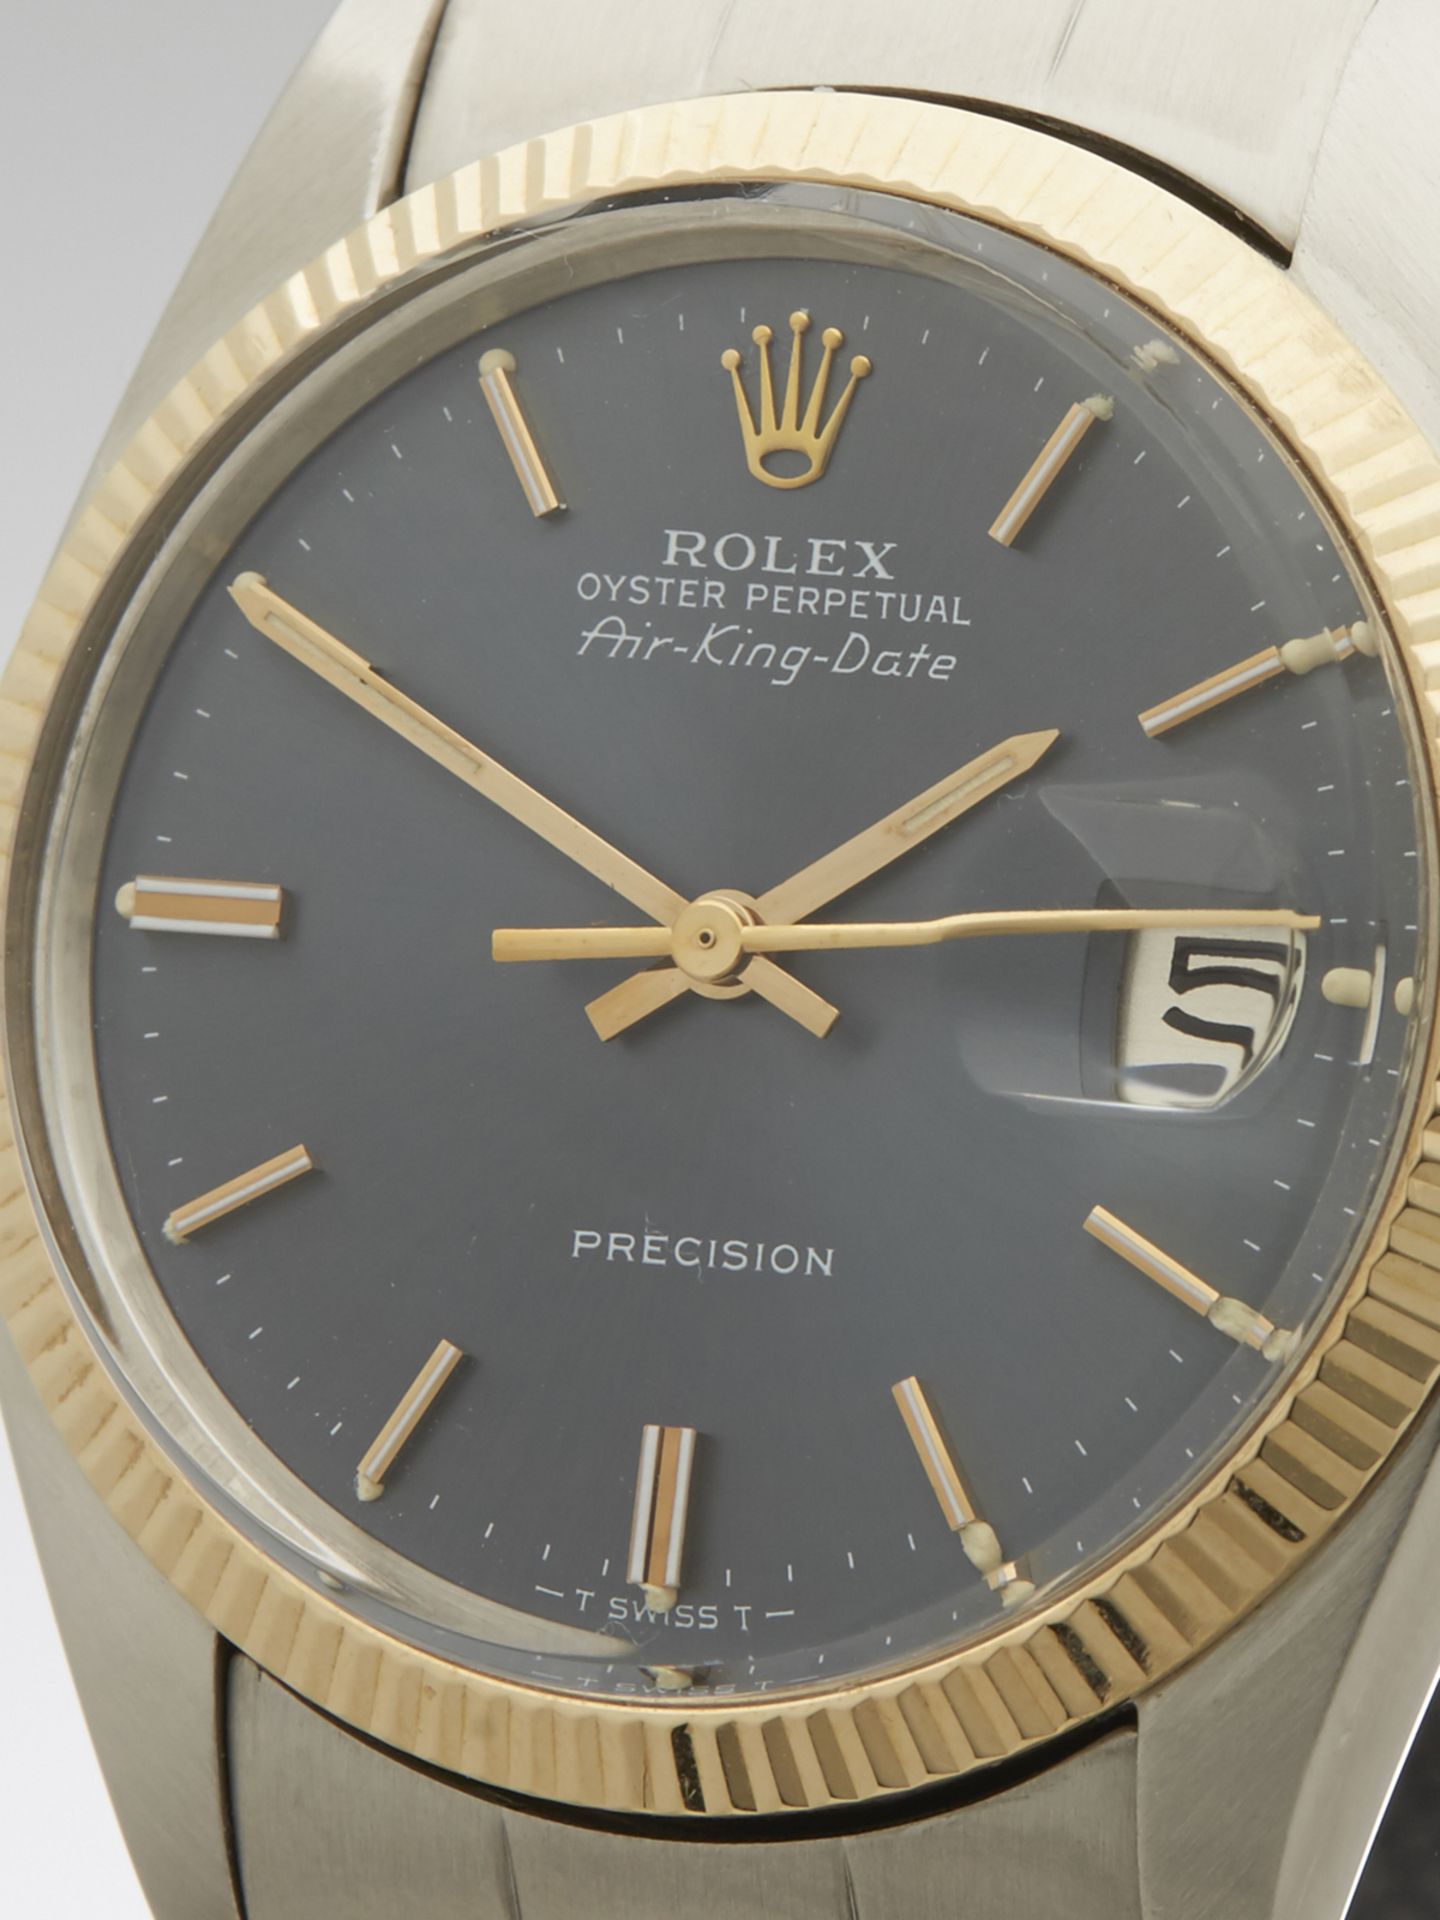 1978 Rolex, Air King Date, Rare Gold Bezel and Crown - Image 2 of 10